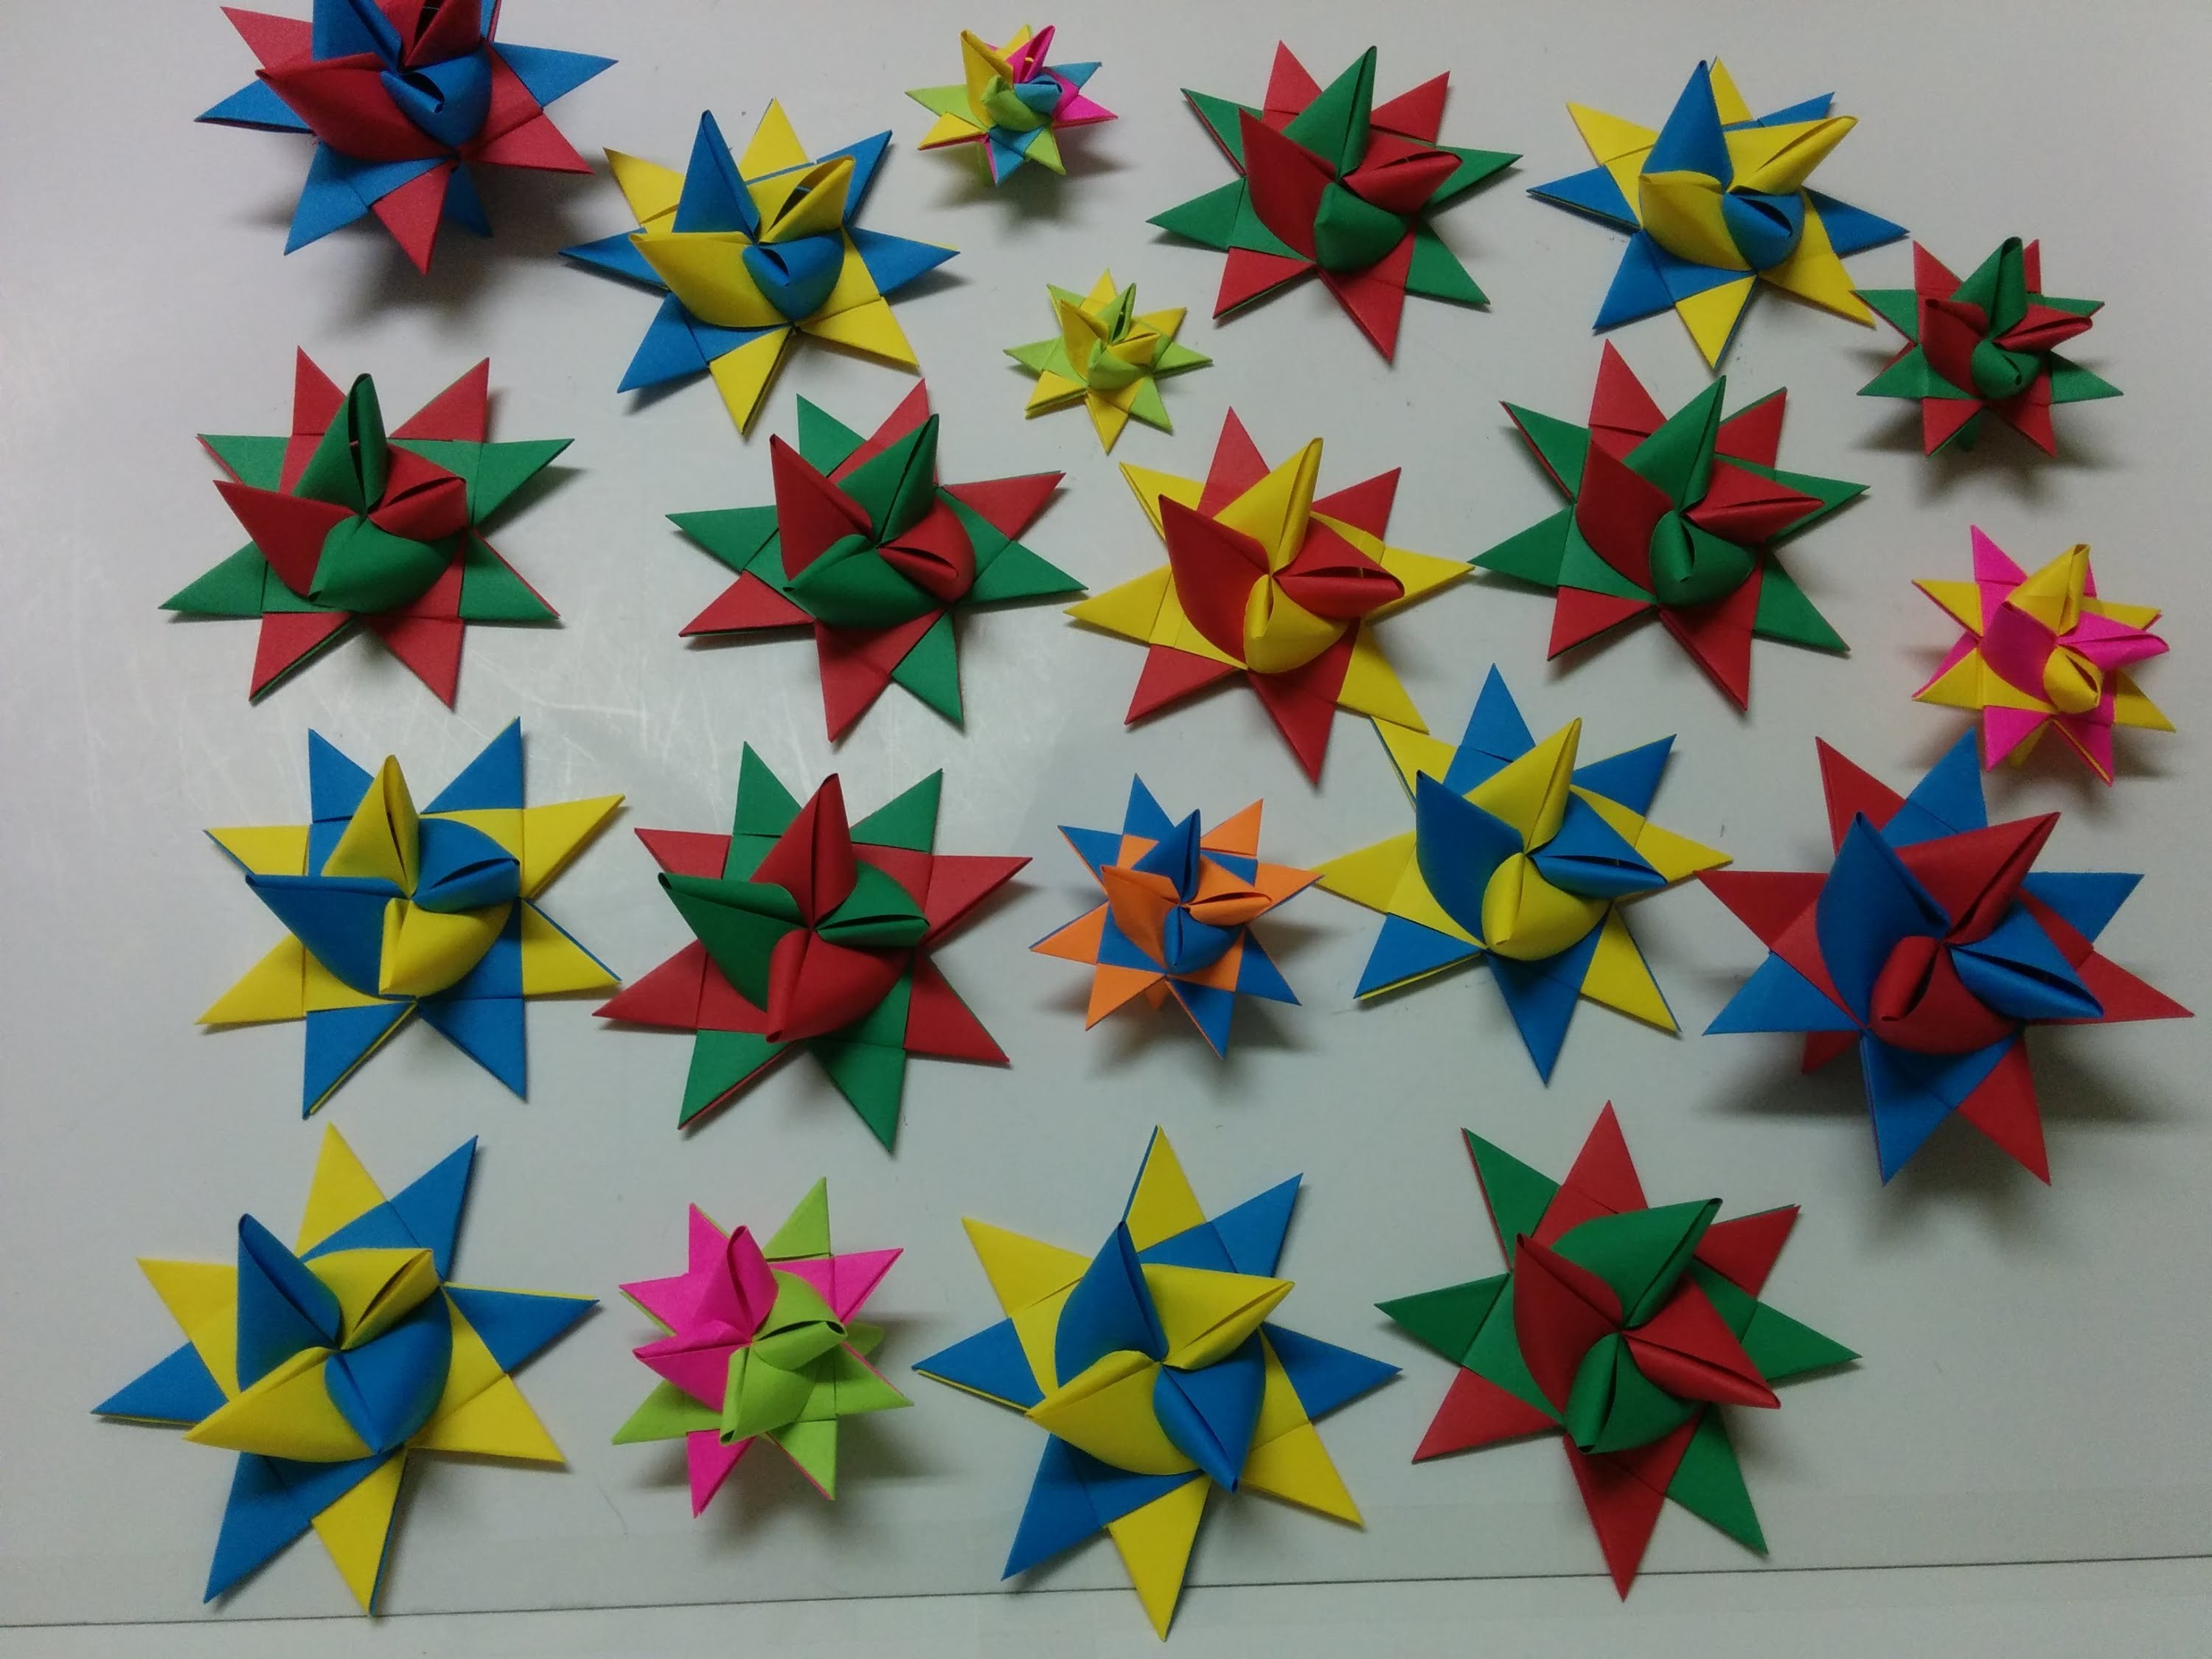 Origami Star How To Make Art And Craft How To Make Origami Starpaper Star